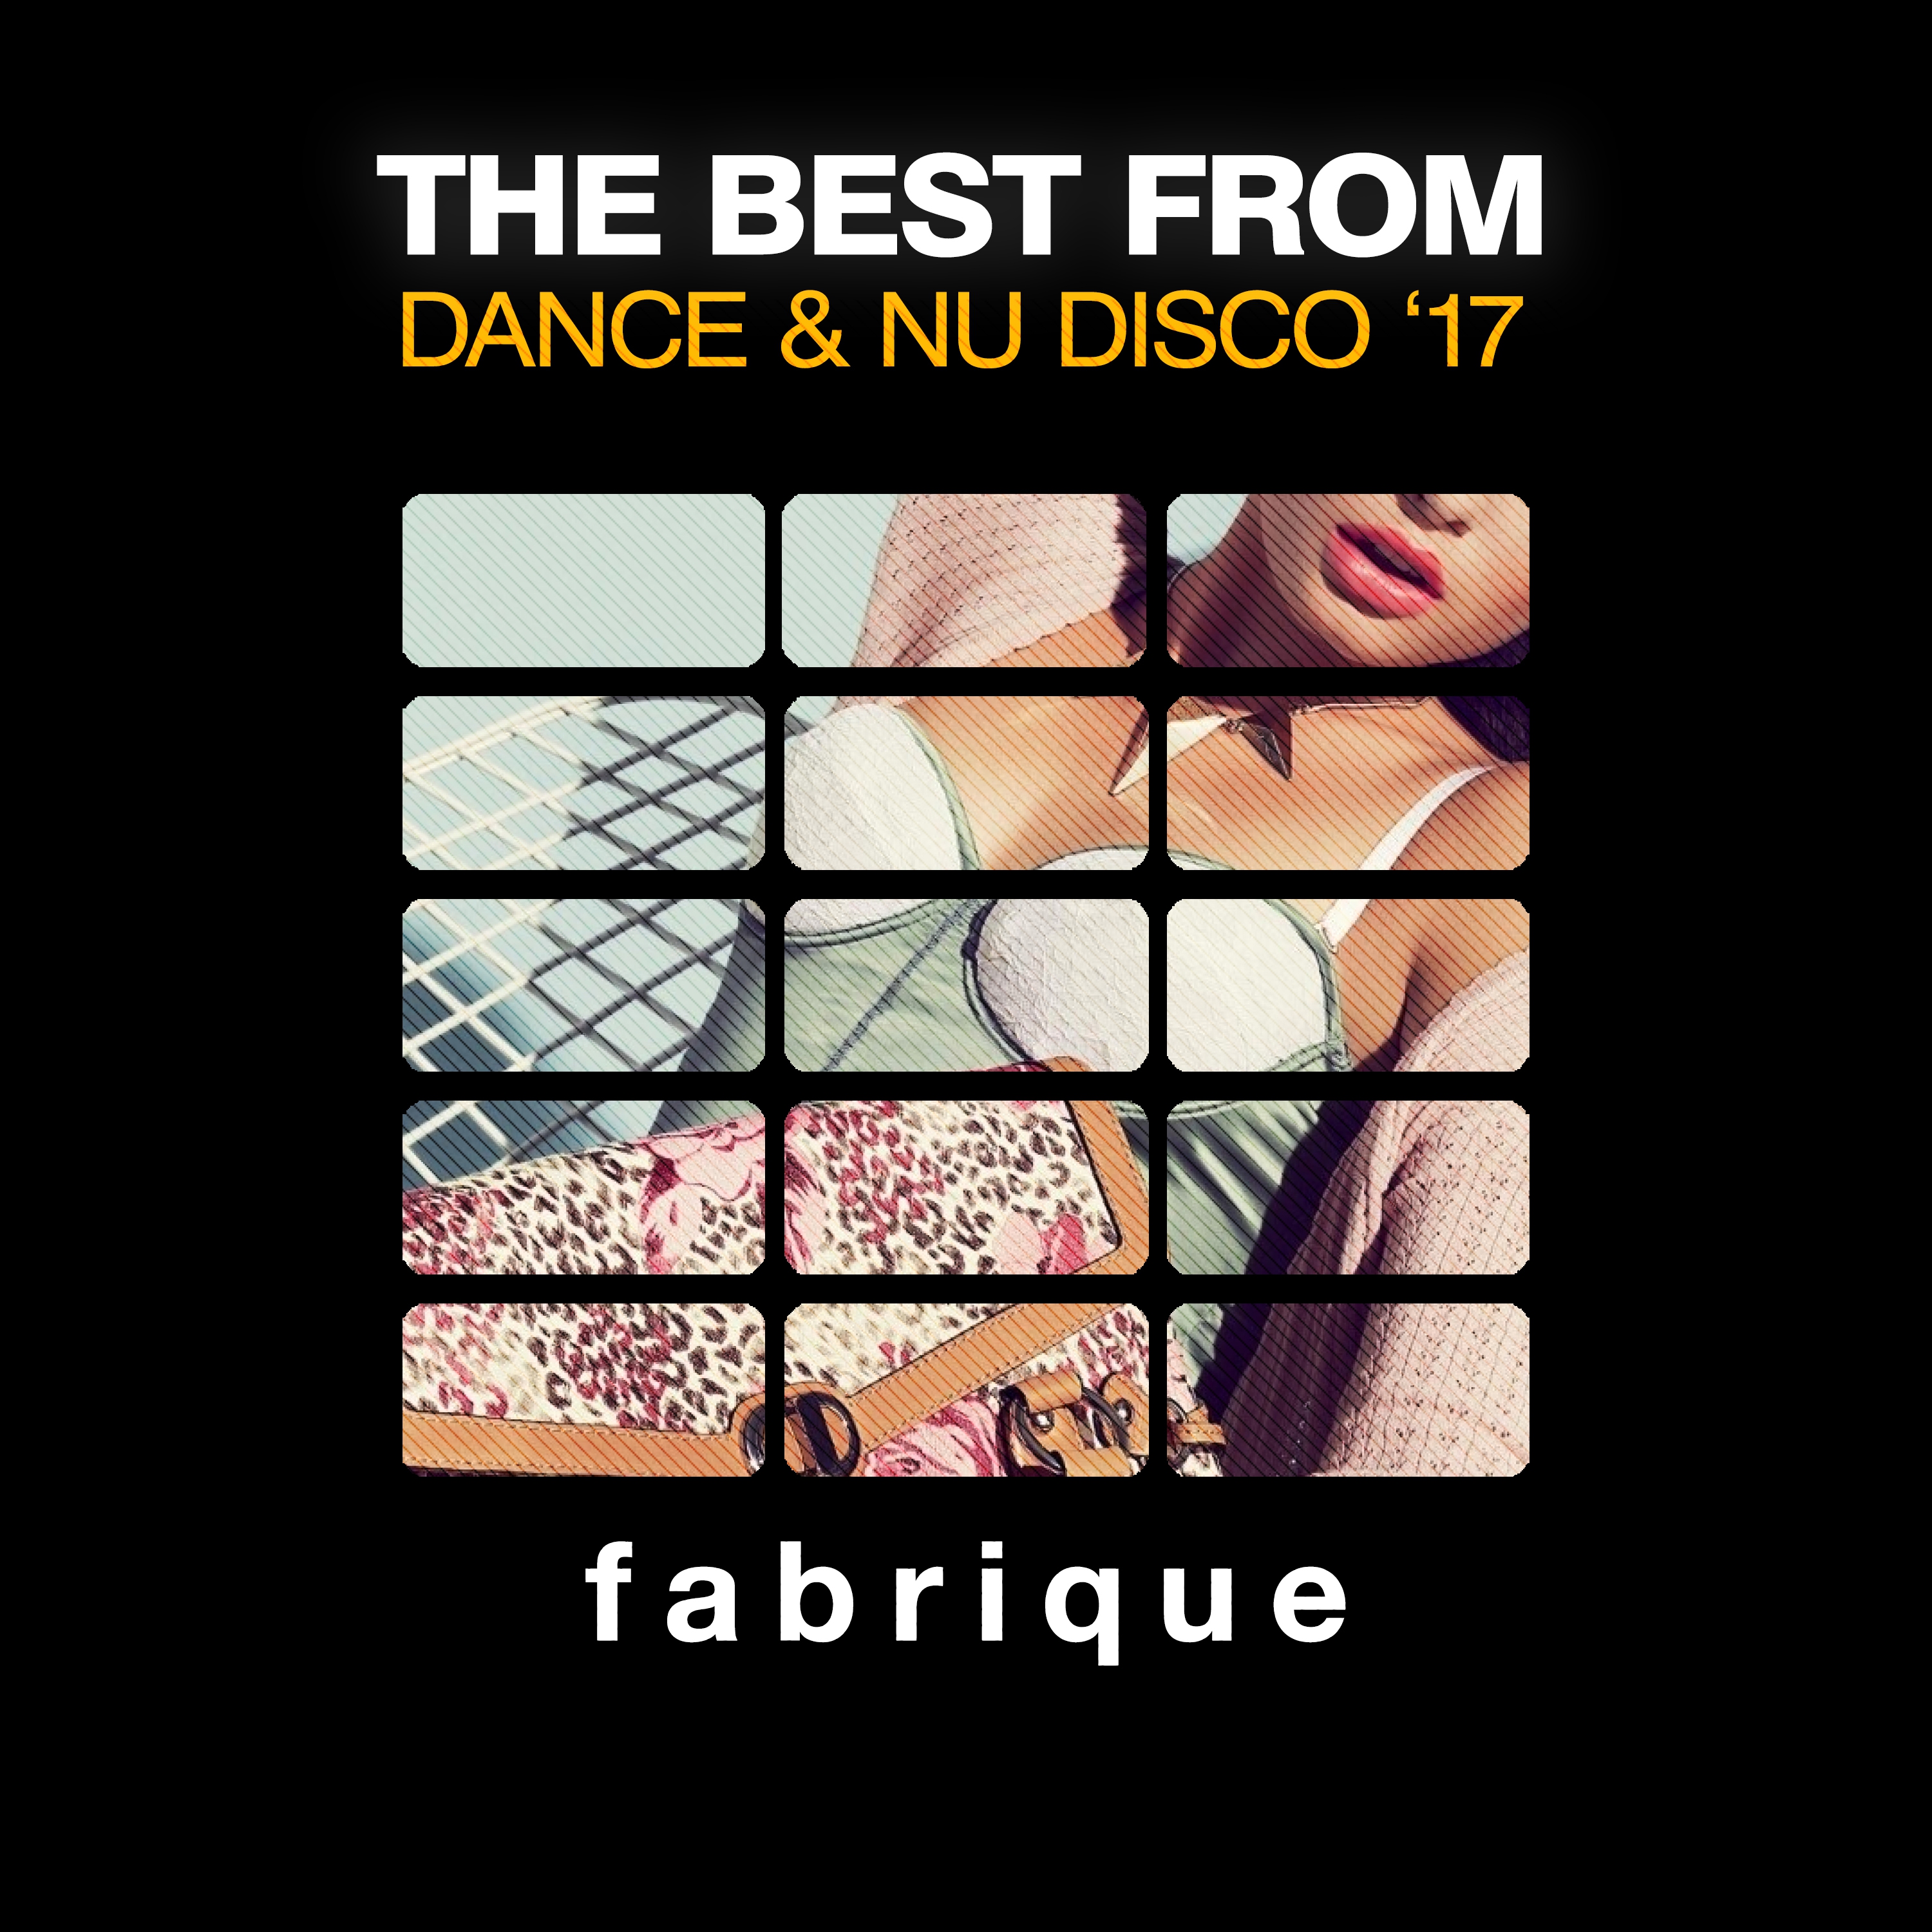 The Best from Dance & Nu Disco '17